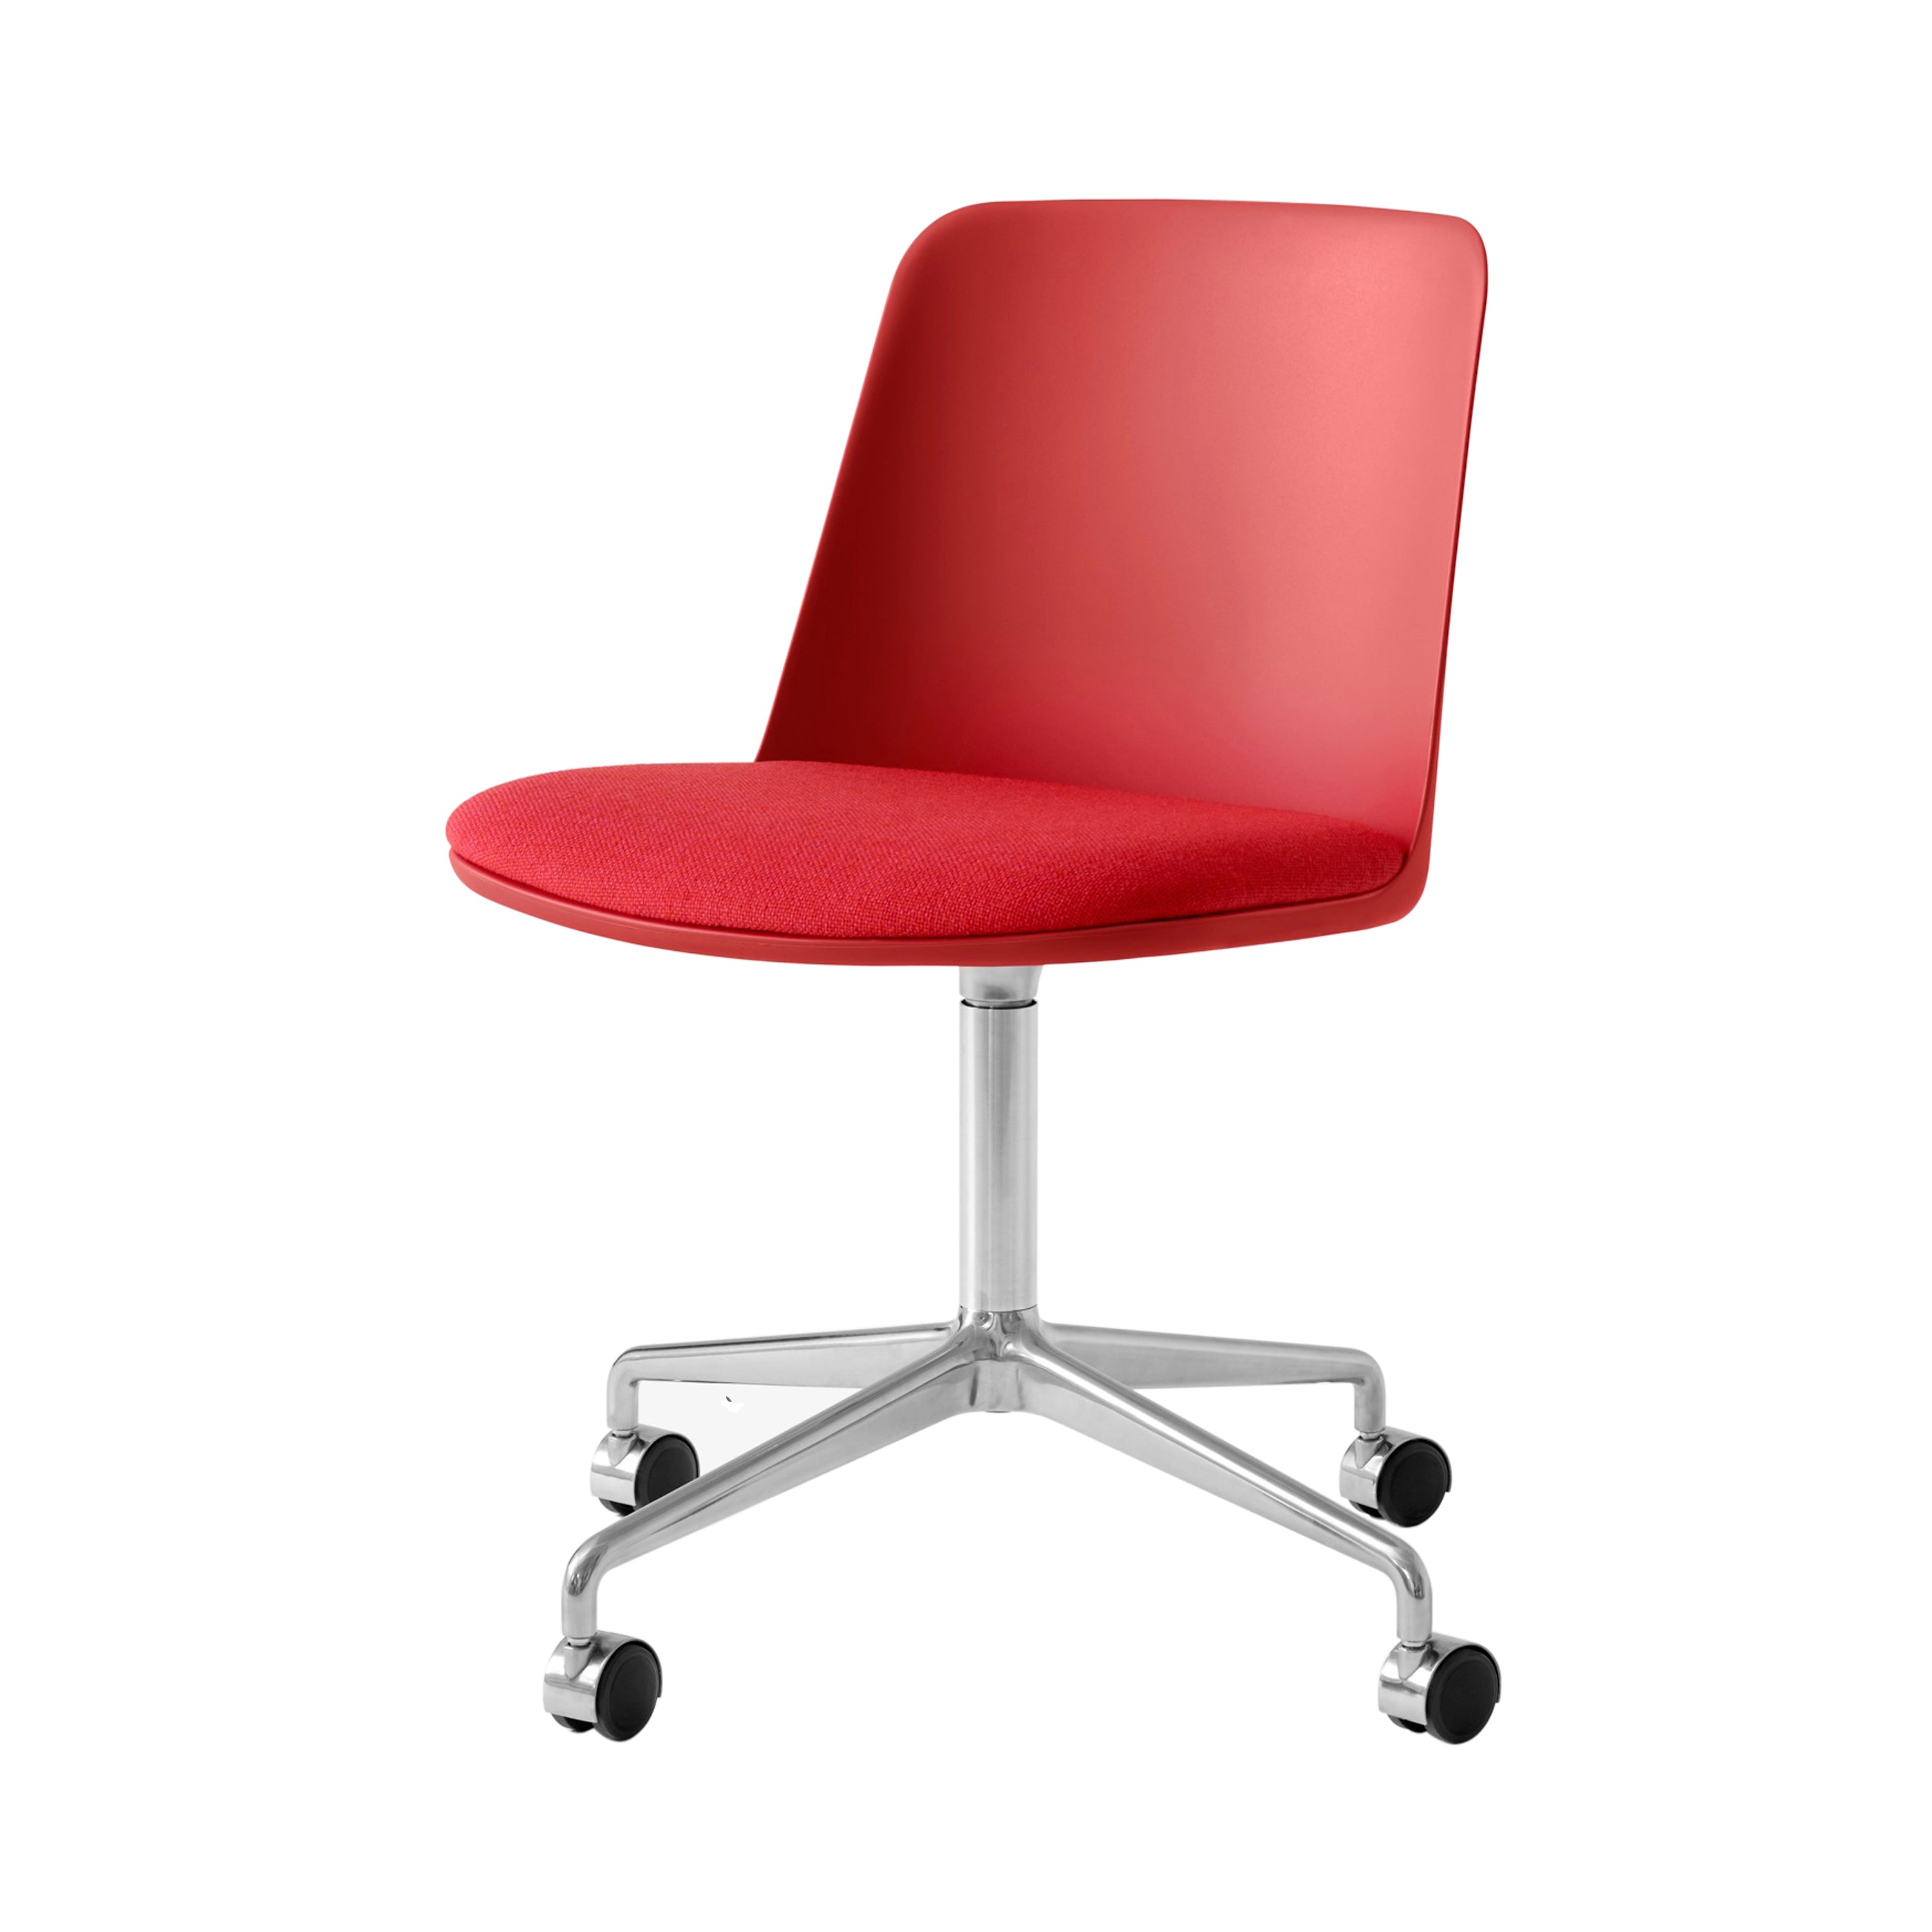 Rely Chair HW22: Polished Aluminum + Vermilion Red